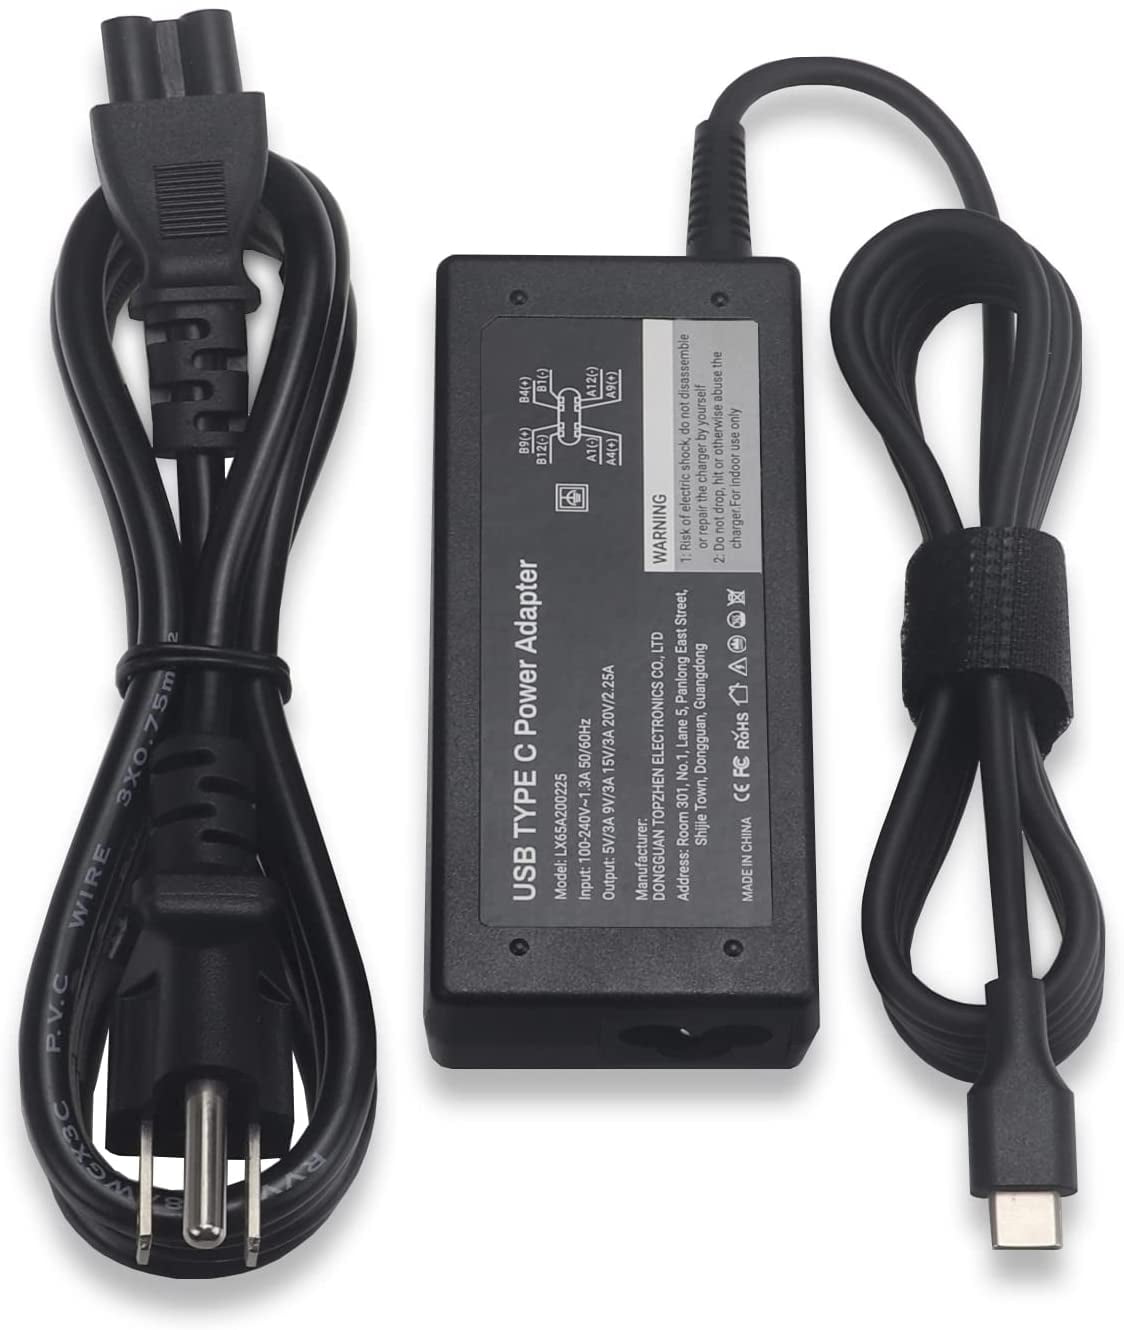 AC 100-240V Converter Adapter DC 24V 1.2A 29W Power Supply Charger 1200mA New 